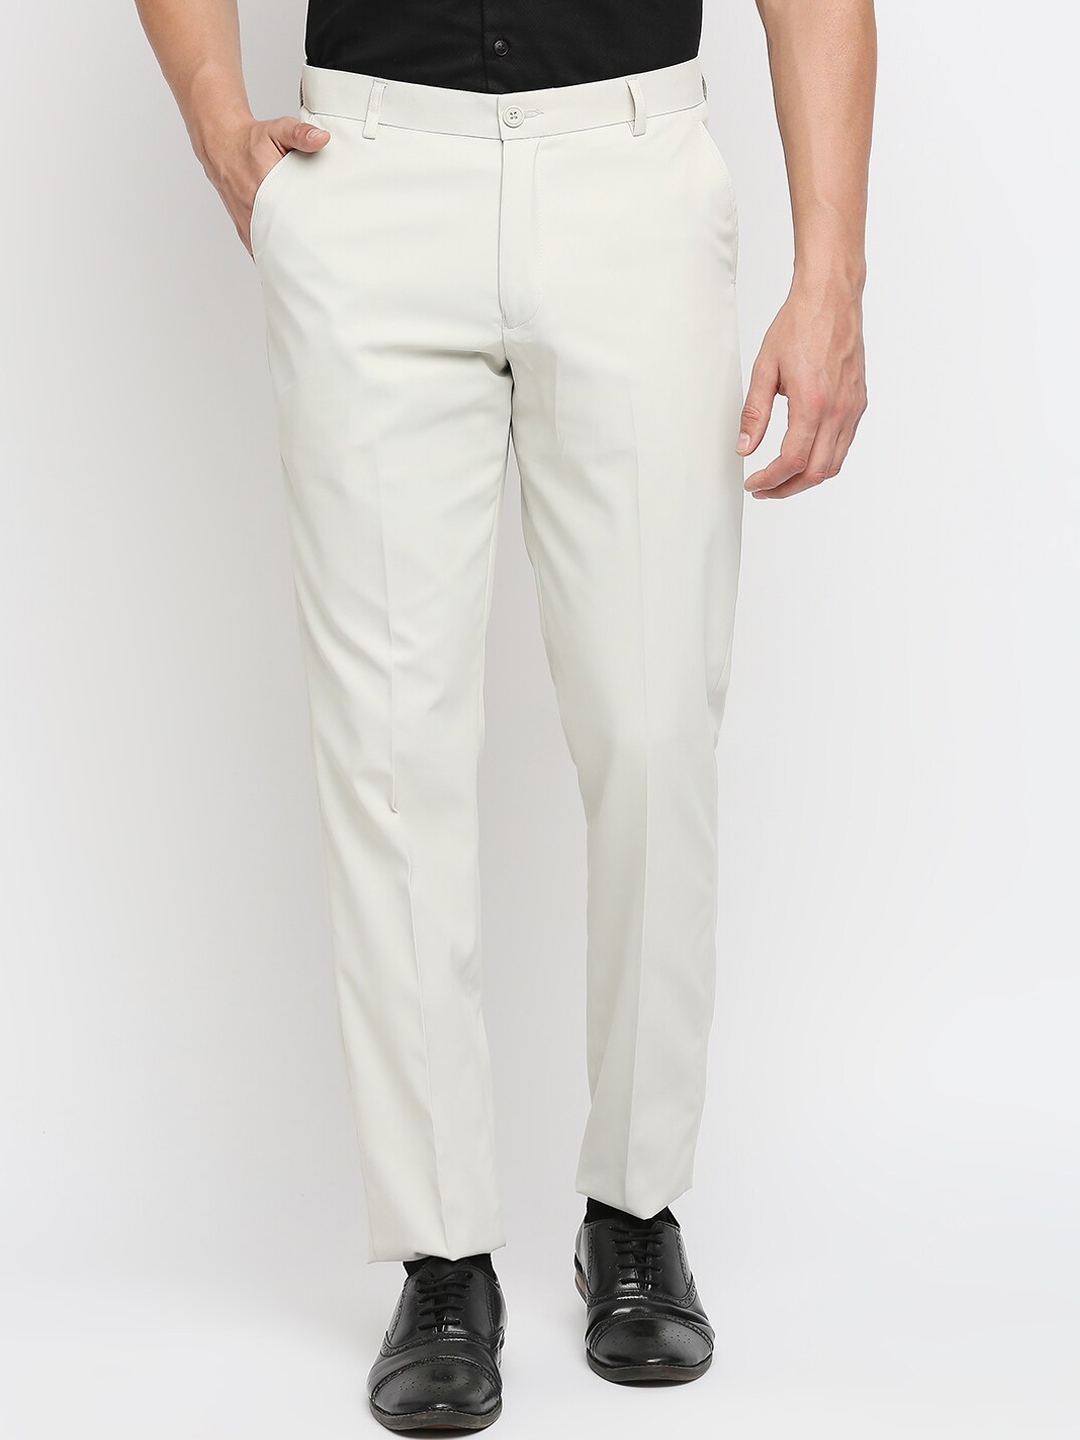 Buy Solemio Men White Relaxed Regular Fit Formal Trousers - Trousers ...